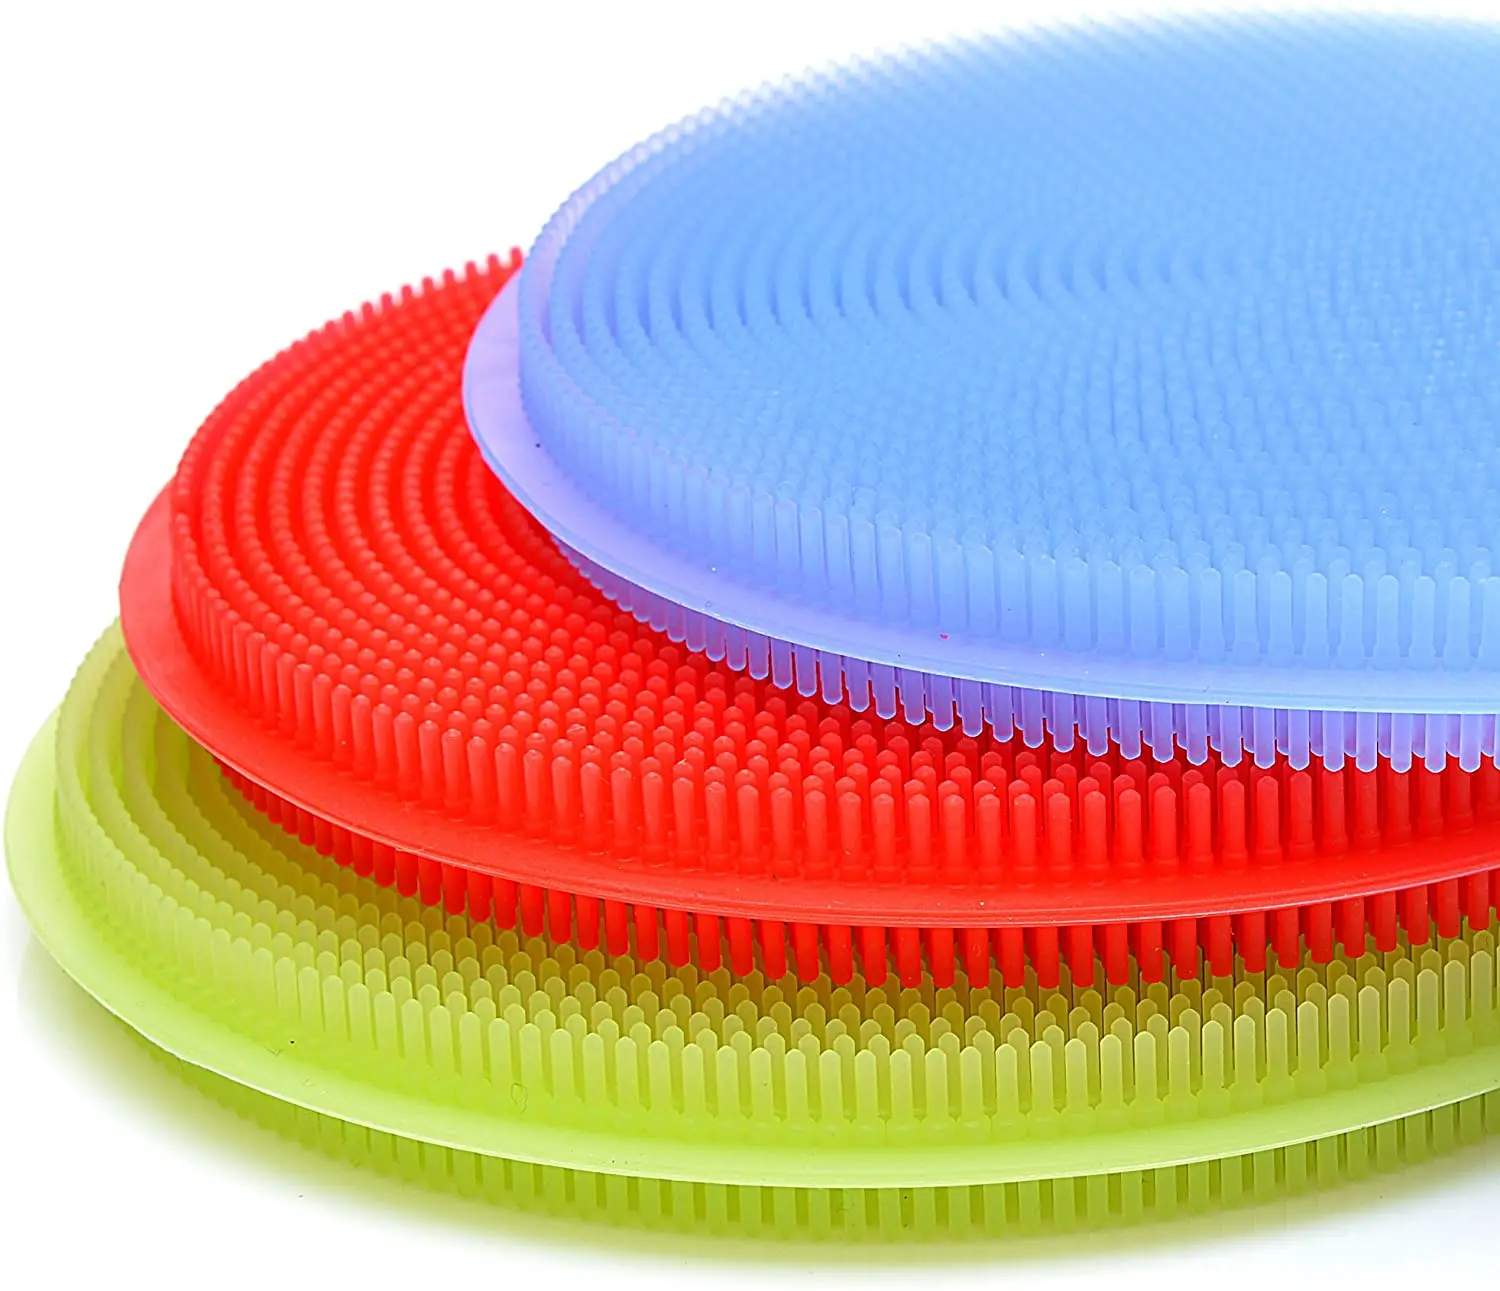 

Anti bacterial Dishes Multipurpose Silicone Sponge Dish Washing Scrubber Kitchen Gadgets Brush Accessories